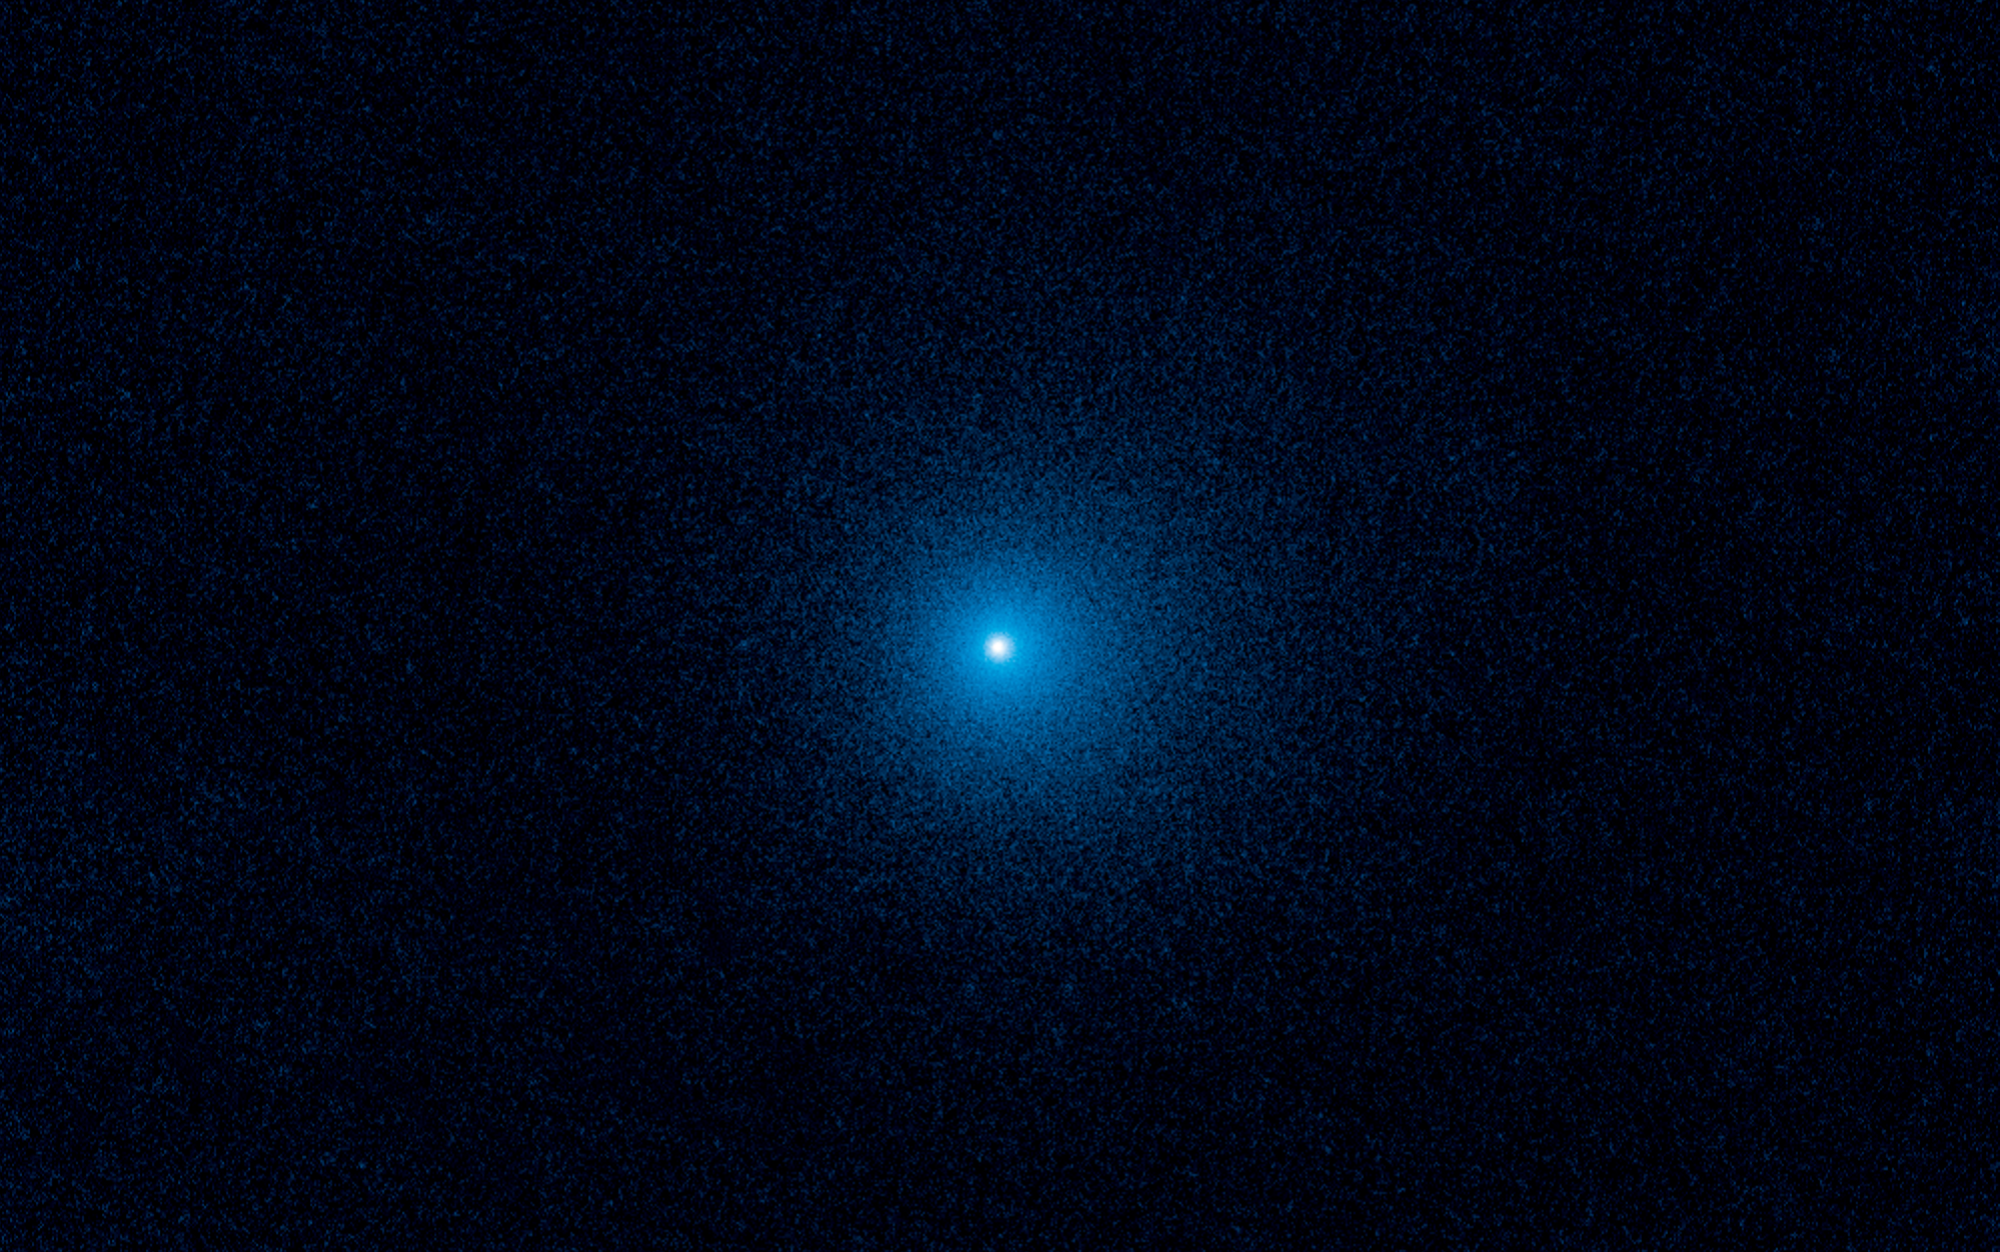 K2 comet looking like a blue dot in the black vastness of the solar system before its Earth flyby